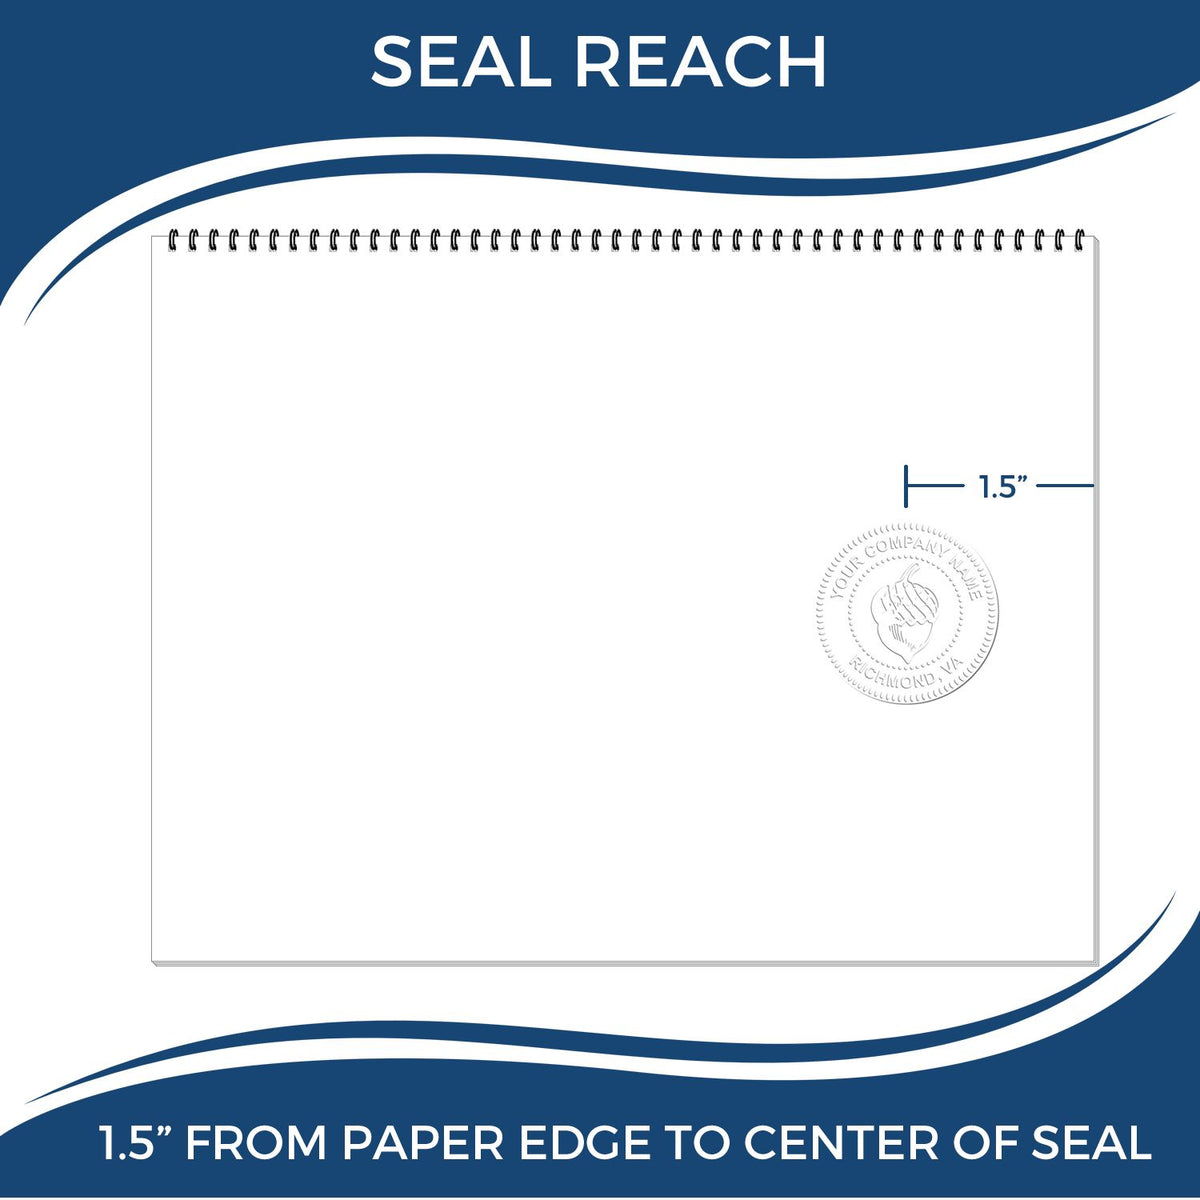 An infographic showing the seal reach which is represented by a ruler and a miniature seal image of the Handheld New York Architect Seal Embosser